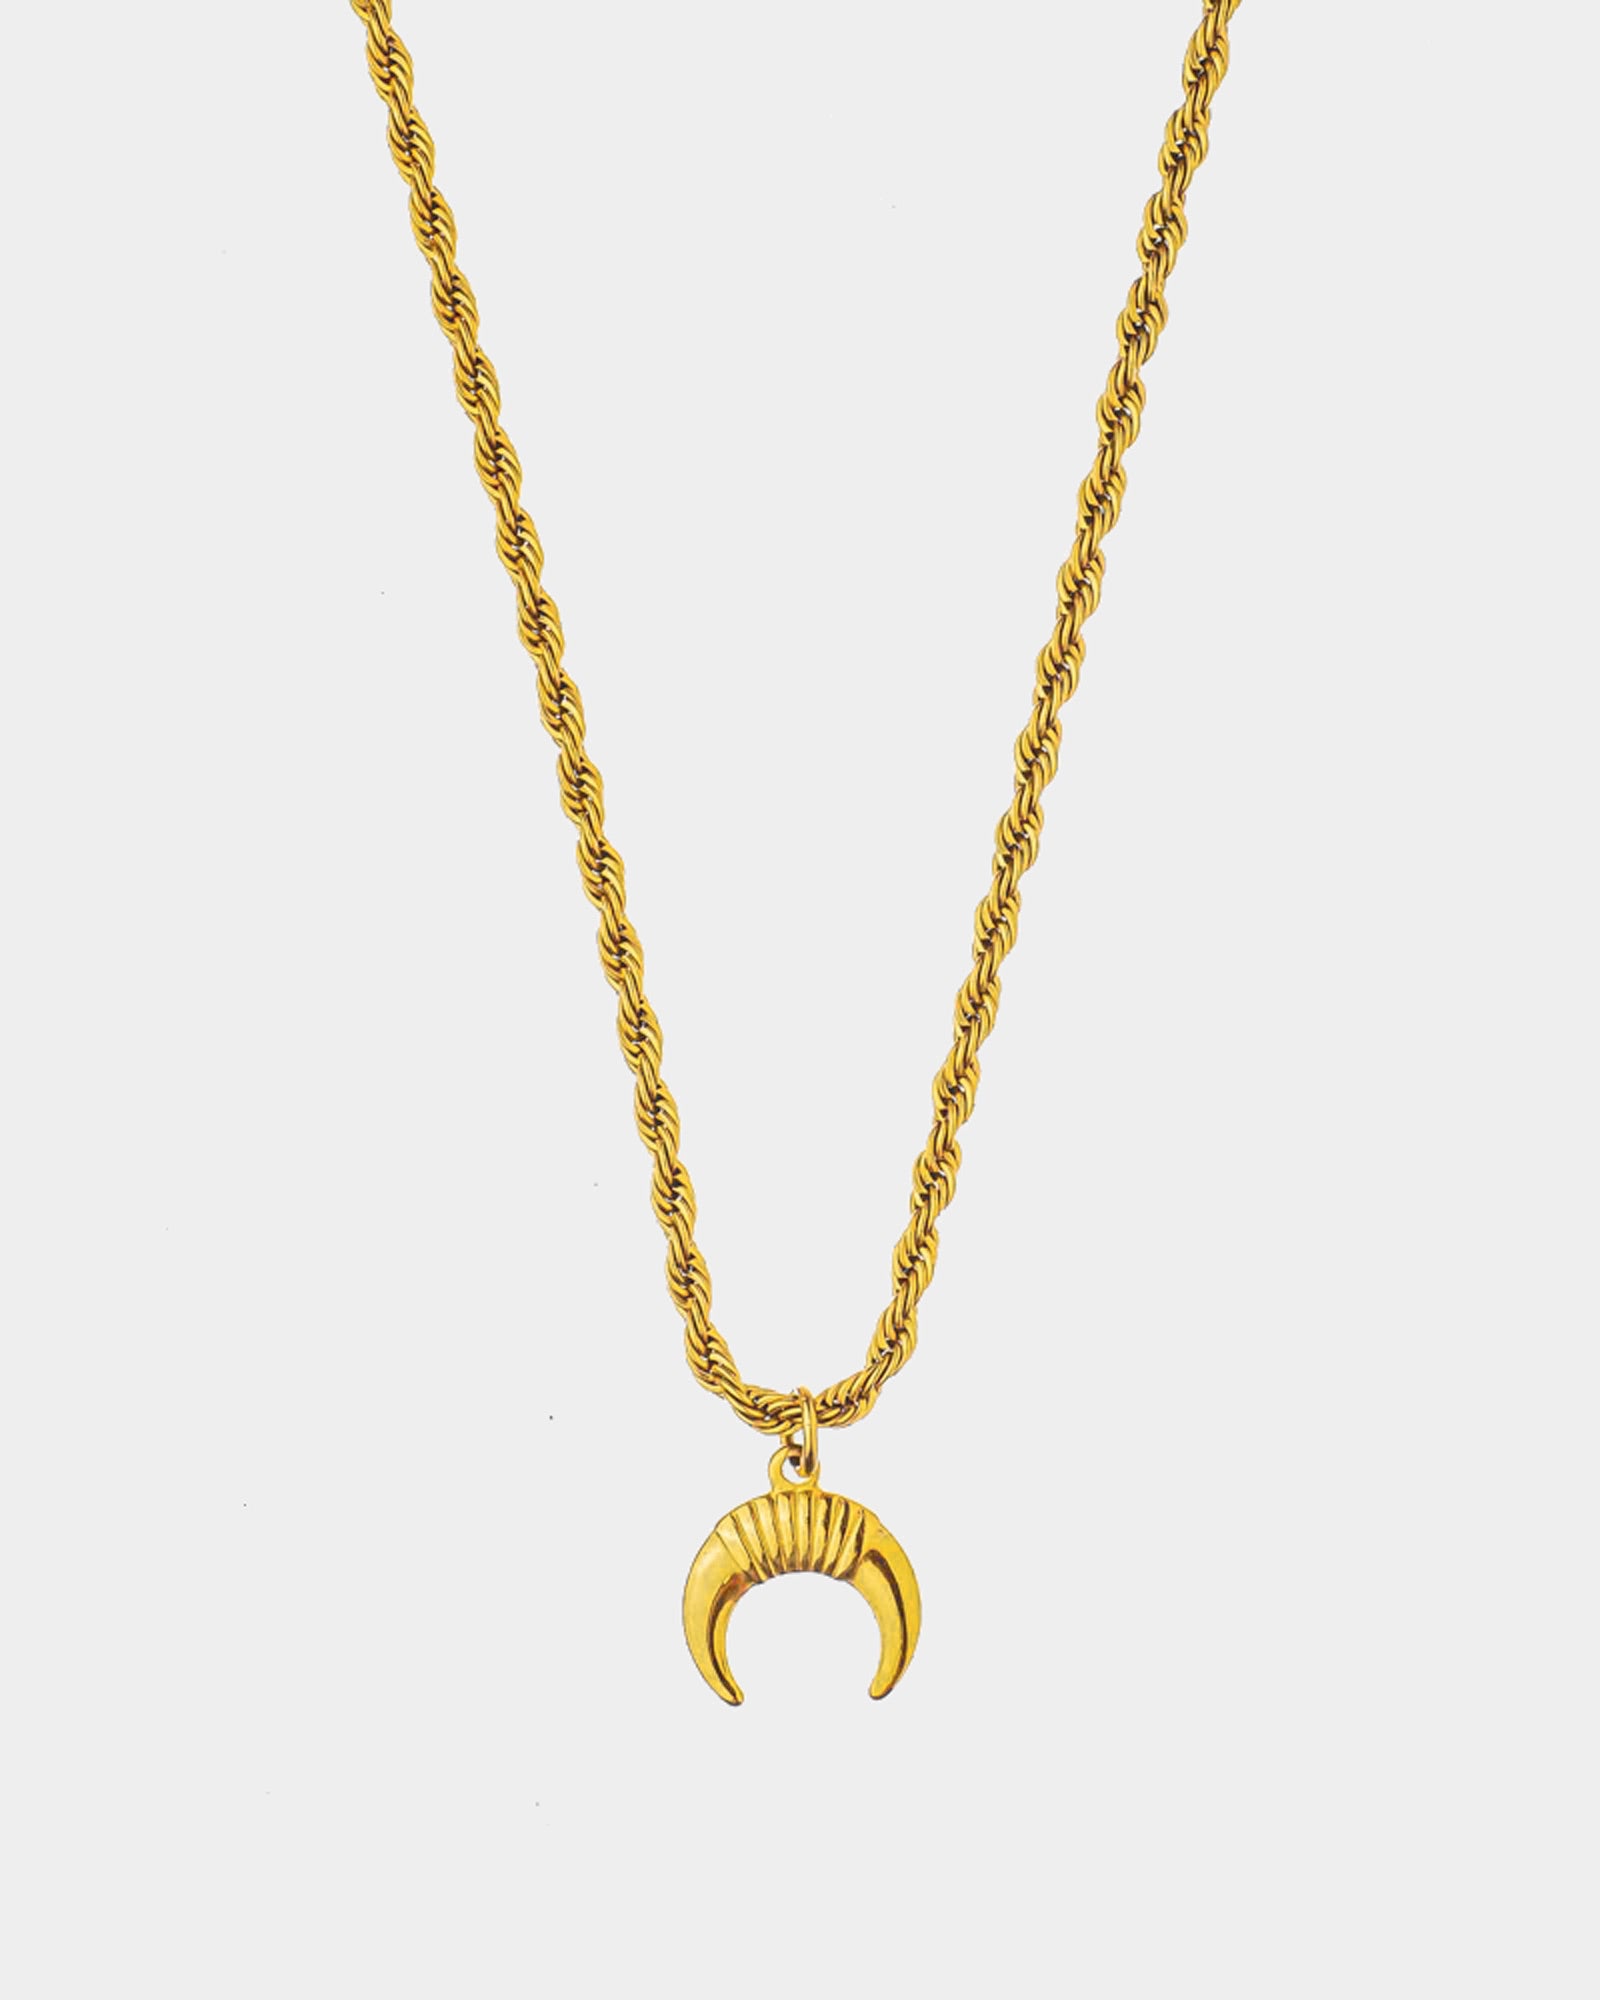 Horns - Golden Steel Twisted Chain 'Horns' - Raso stainless steel chain and a one horn pendant - Online Unissex Jewelry - Dicci